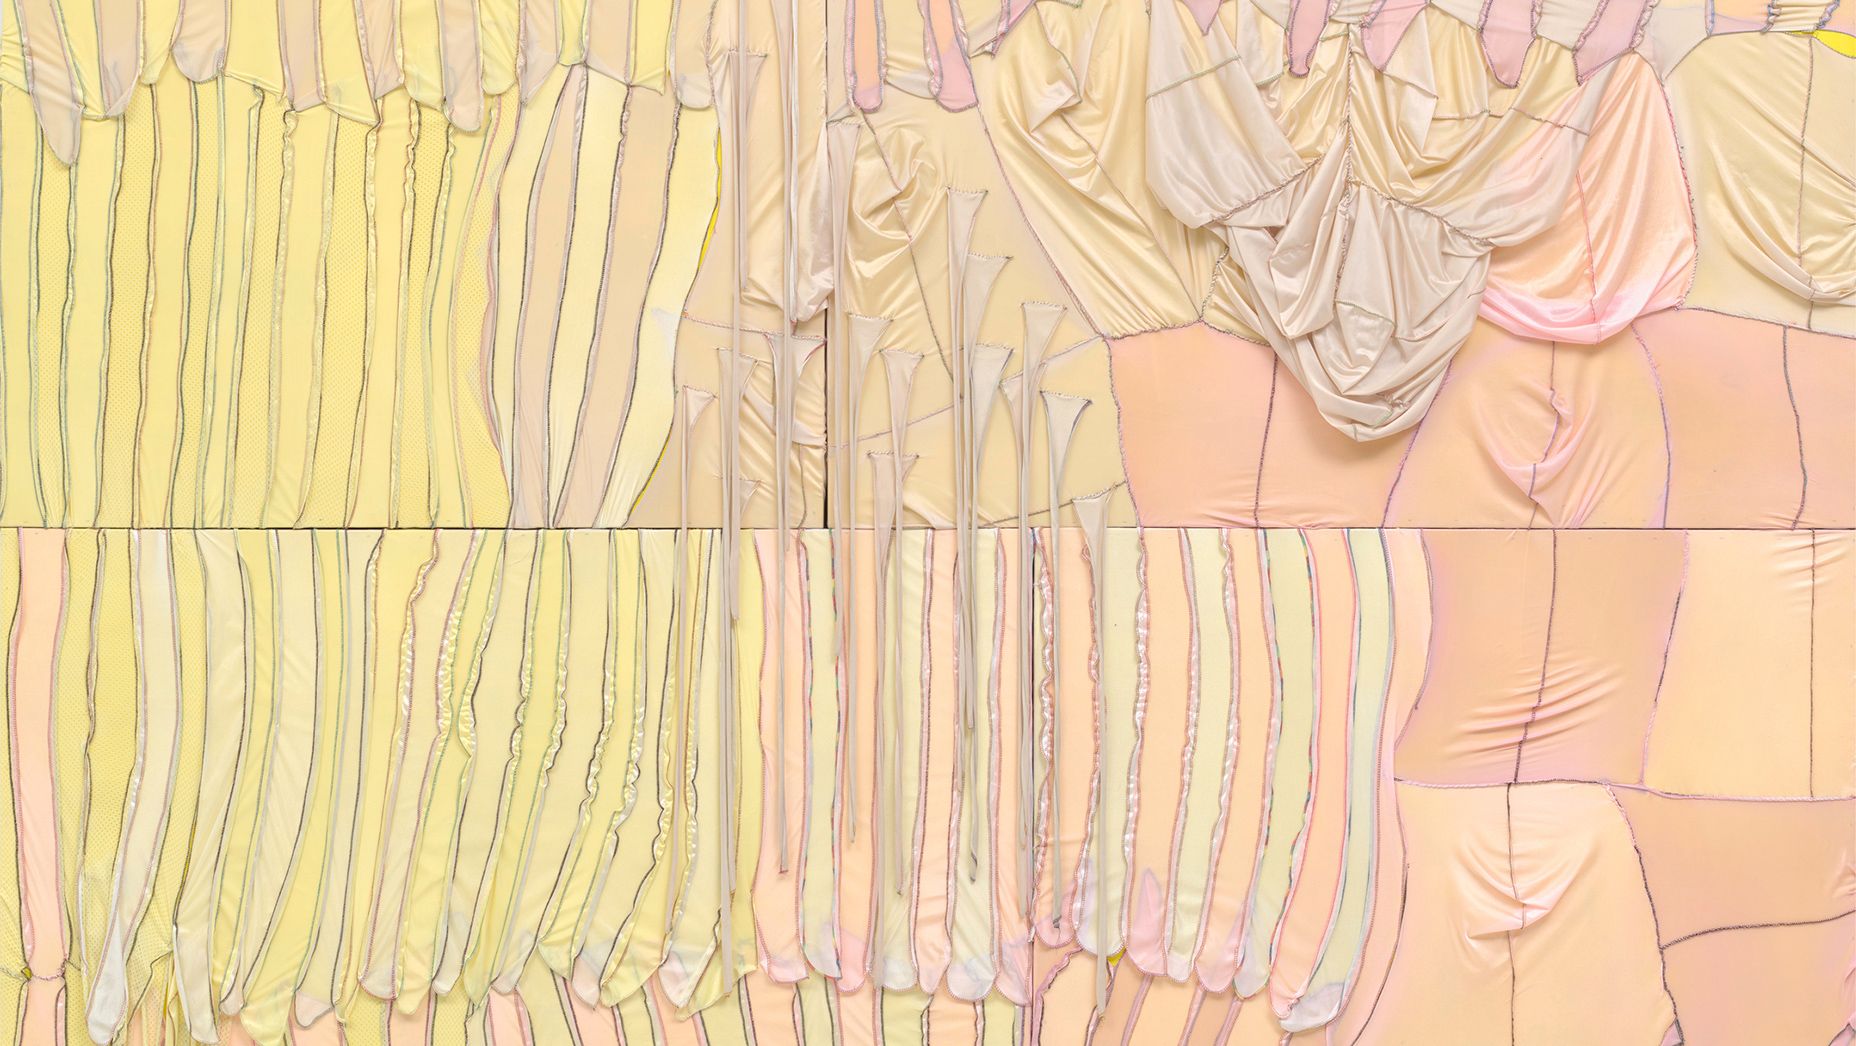 An abstract artwork by Anthony Akinbola comprised of vertically oriented sections of durag and acrylic paint in various shades of yellow, pink, and peach. The sections appear neatly aligned except for in the top left corner, where they range in size and appear to drape like crumpled fabric.